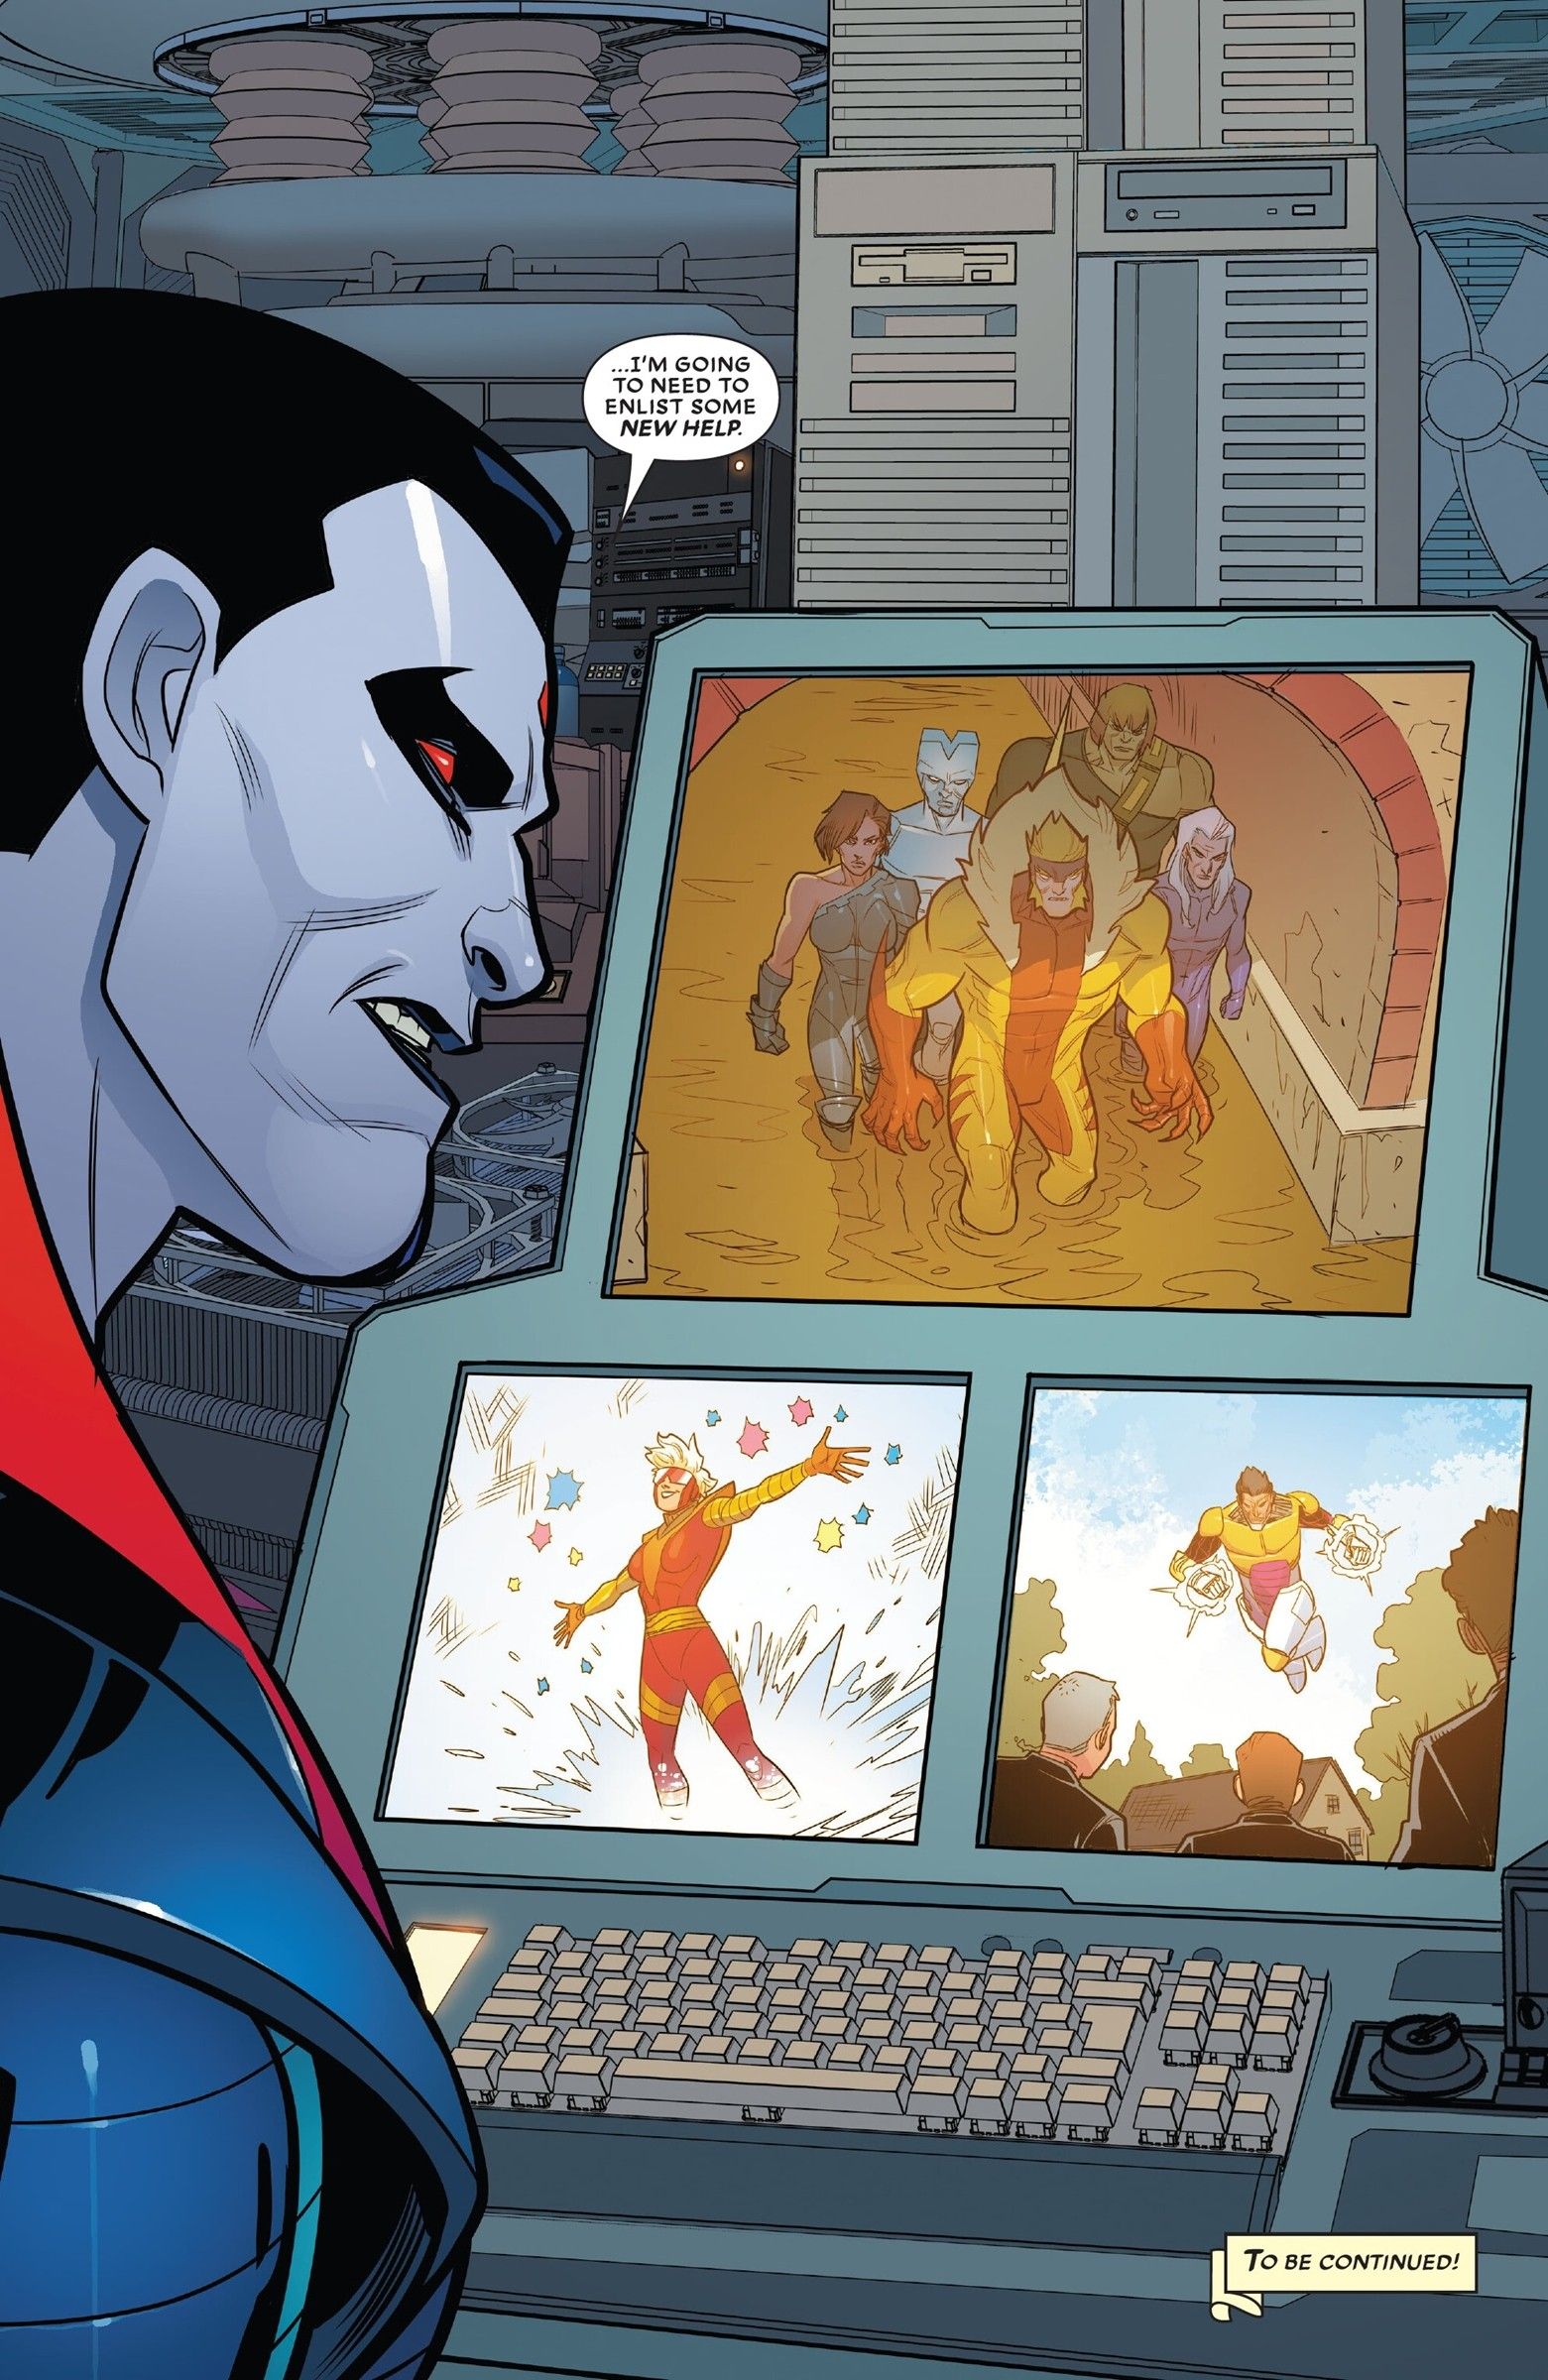 Mister Sinister views evil mutants on a monitor